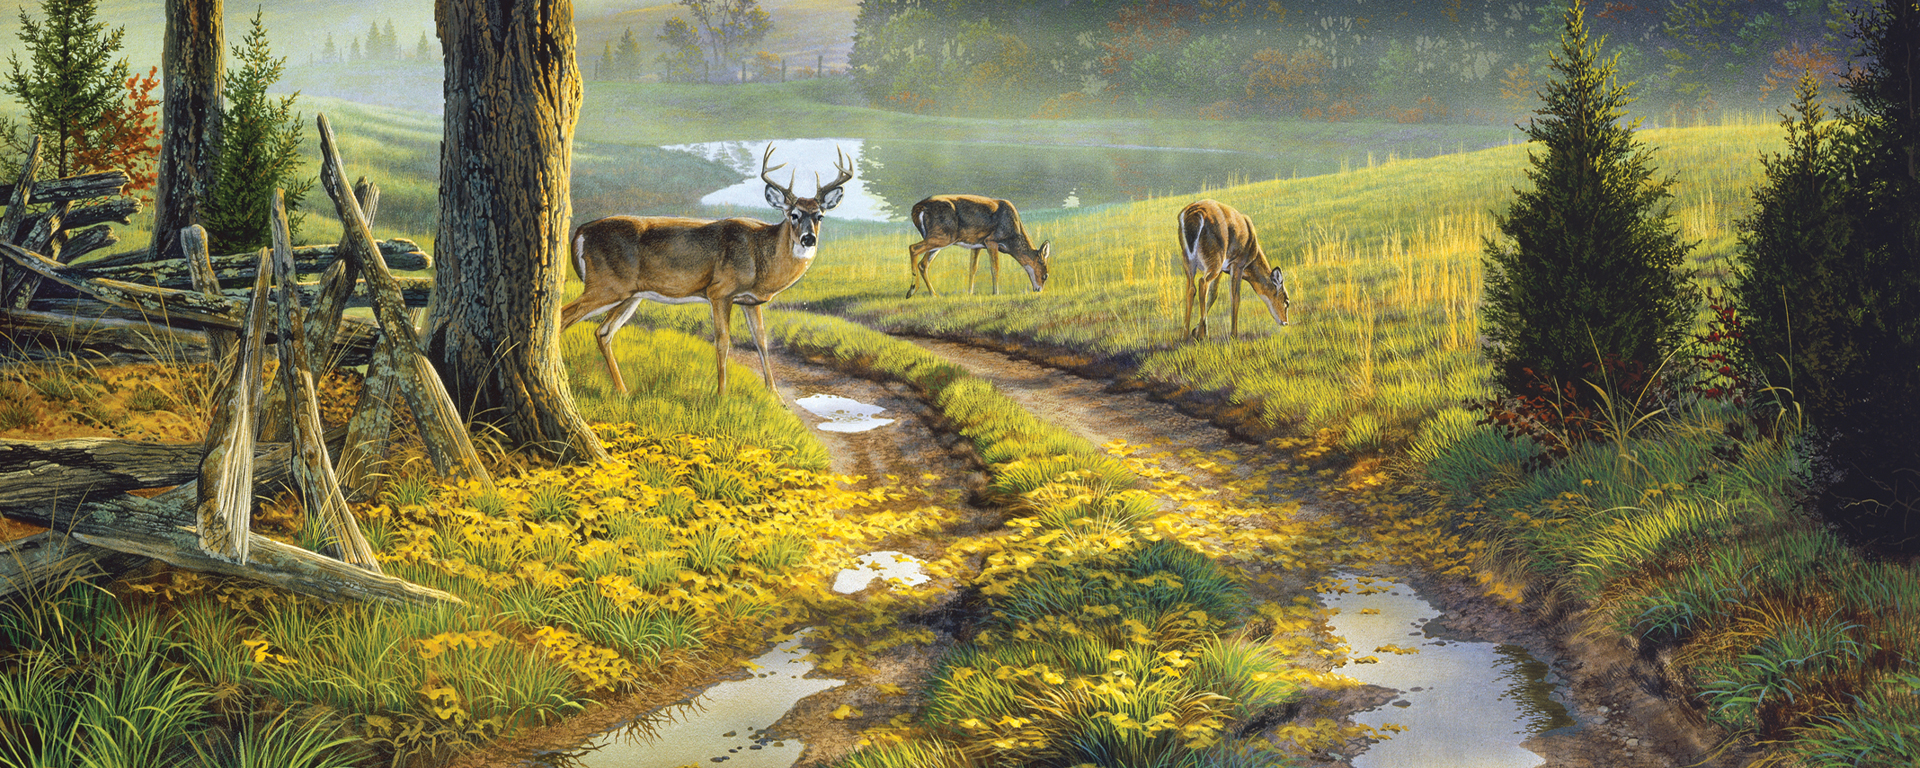 three deer standing on dirt road on a misty fall morning